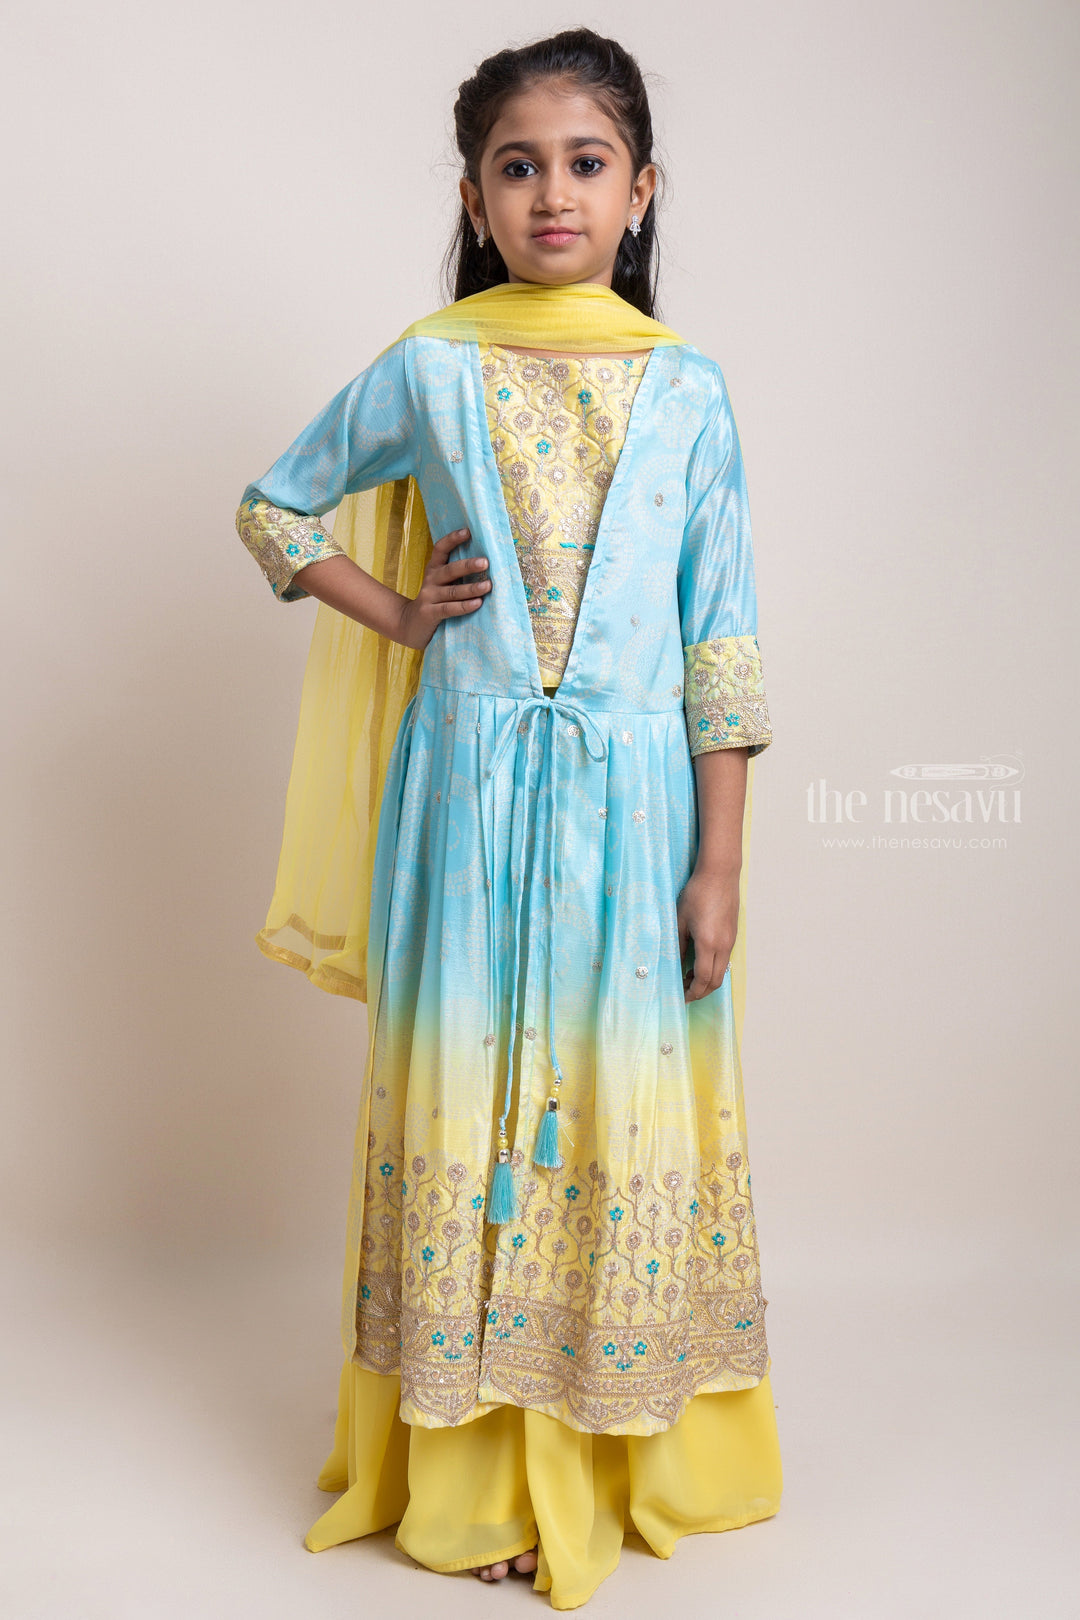 The Nesavu Girls Sharara / Plazo Set Adorable Pastel Yellow Floral Embroidery Crop top And Palazzo Set With designer Overcoat For Girls Nesavu 24 (5Y) / Yellow GPS125-24 Party Dresses For Young Girls | New Arrivals | The Nesavu